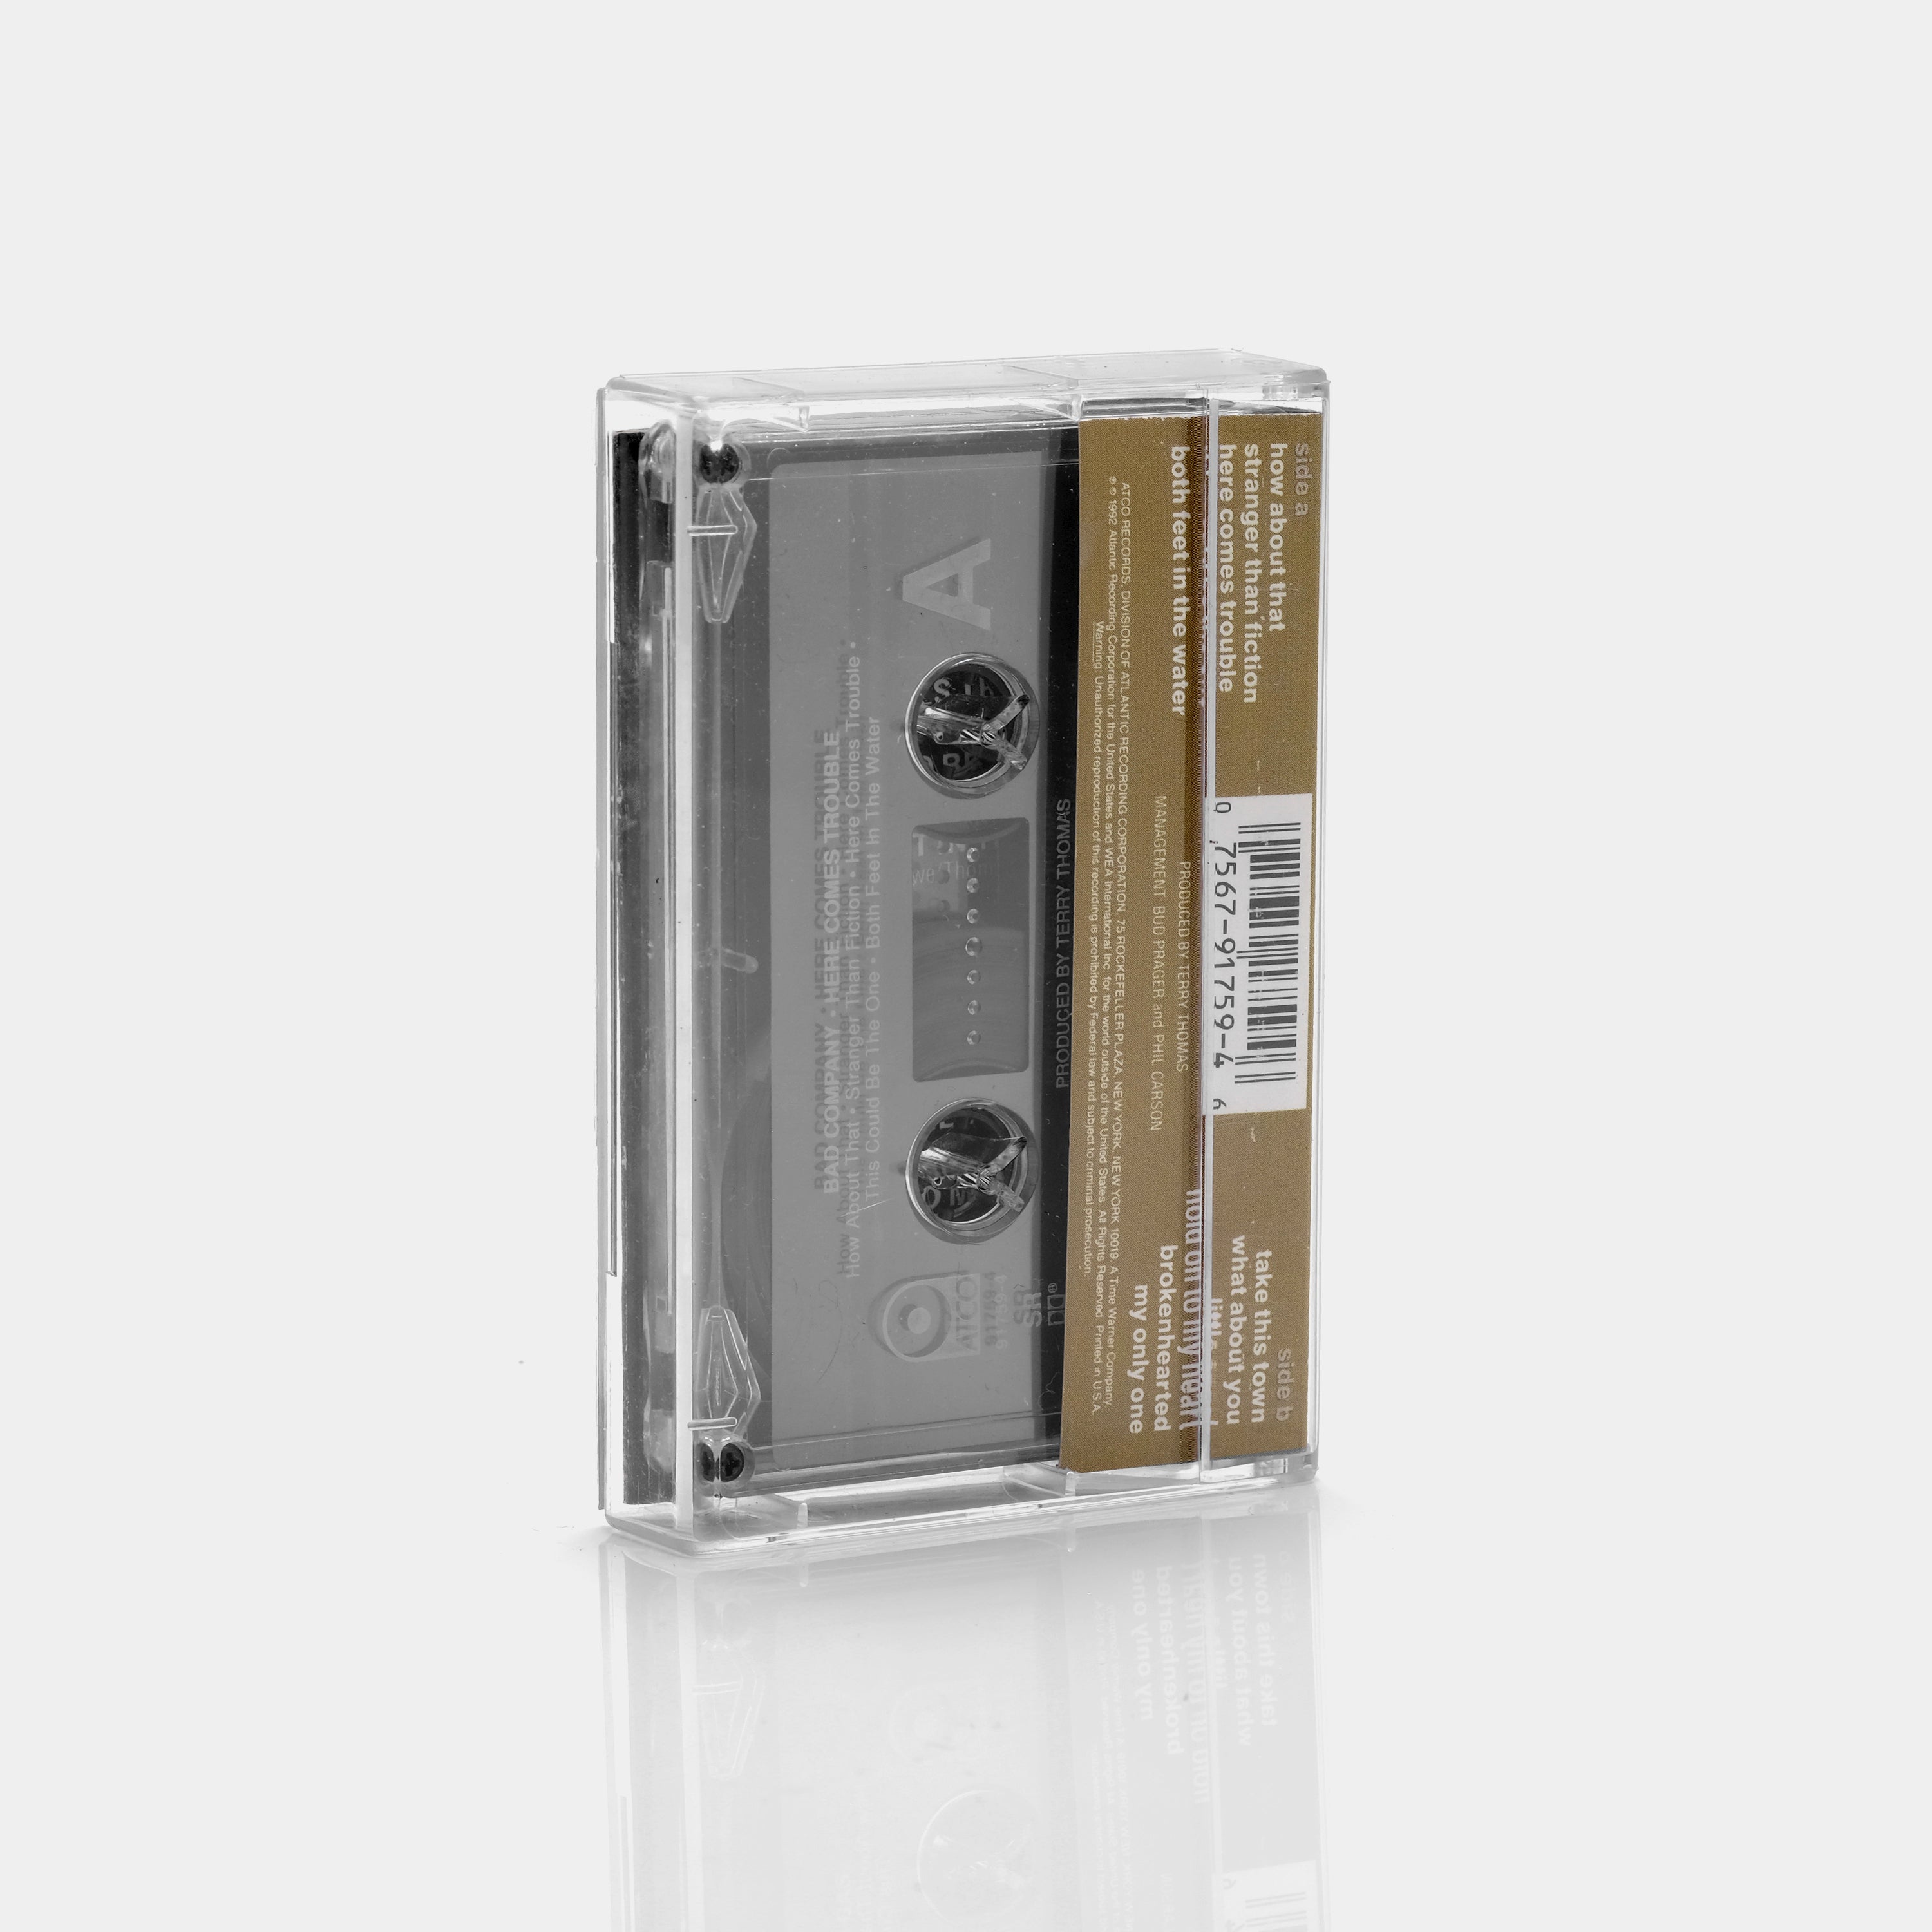 Bad Company - Here Comes Trouble Cassette Tape